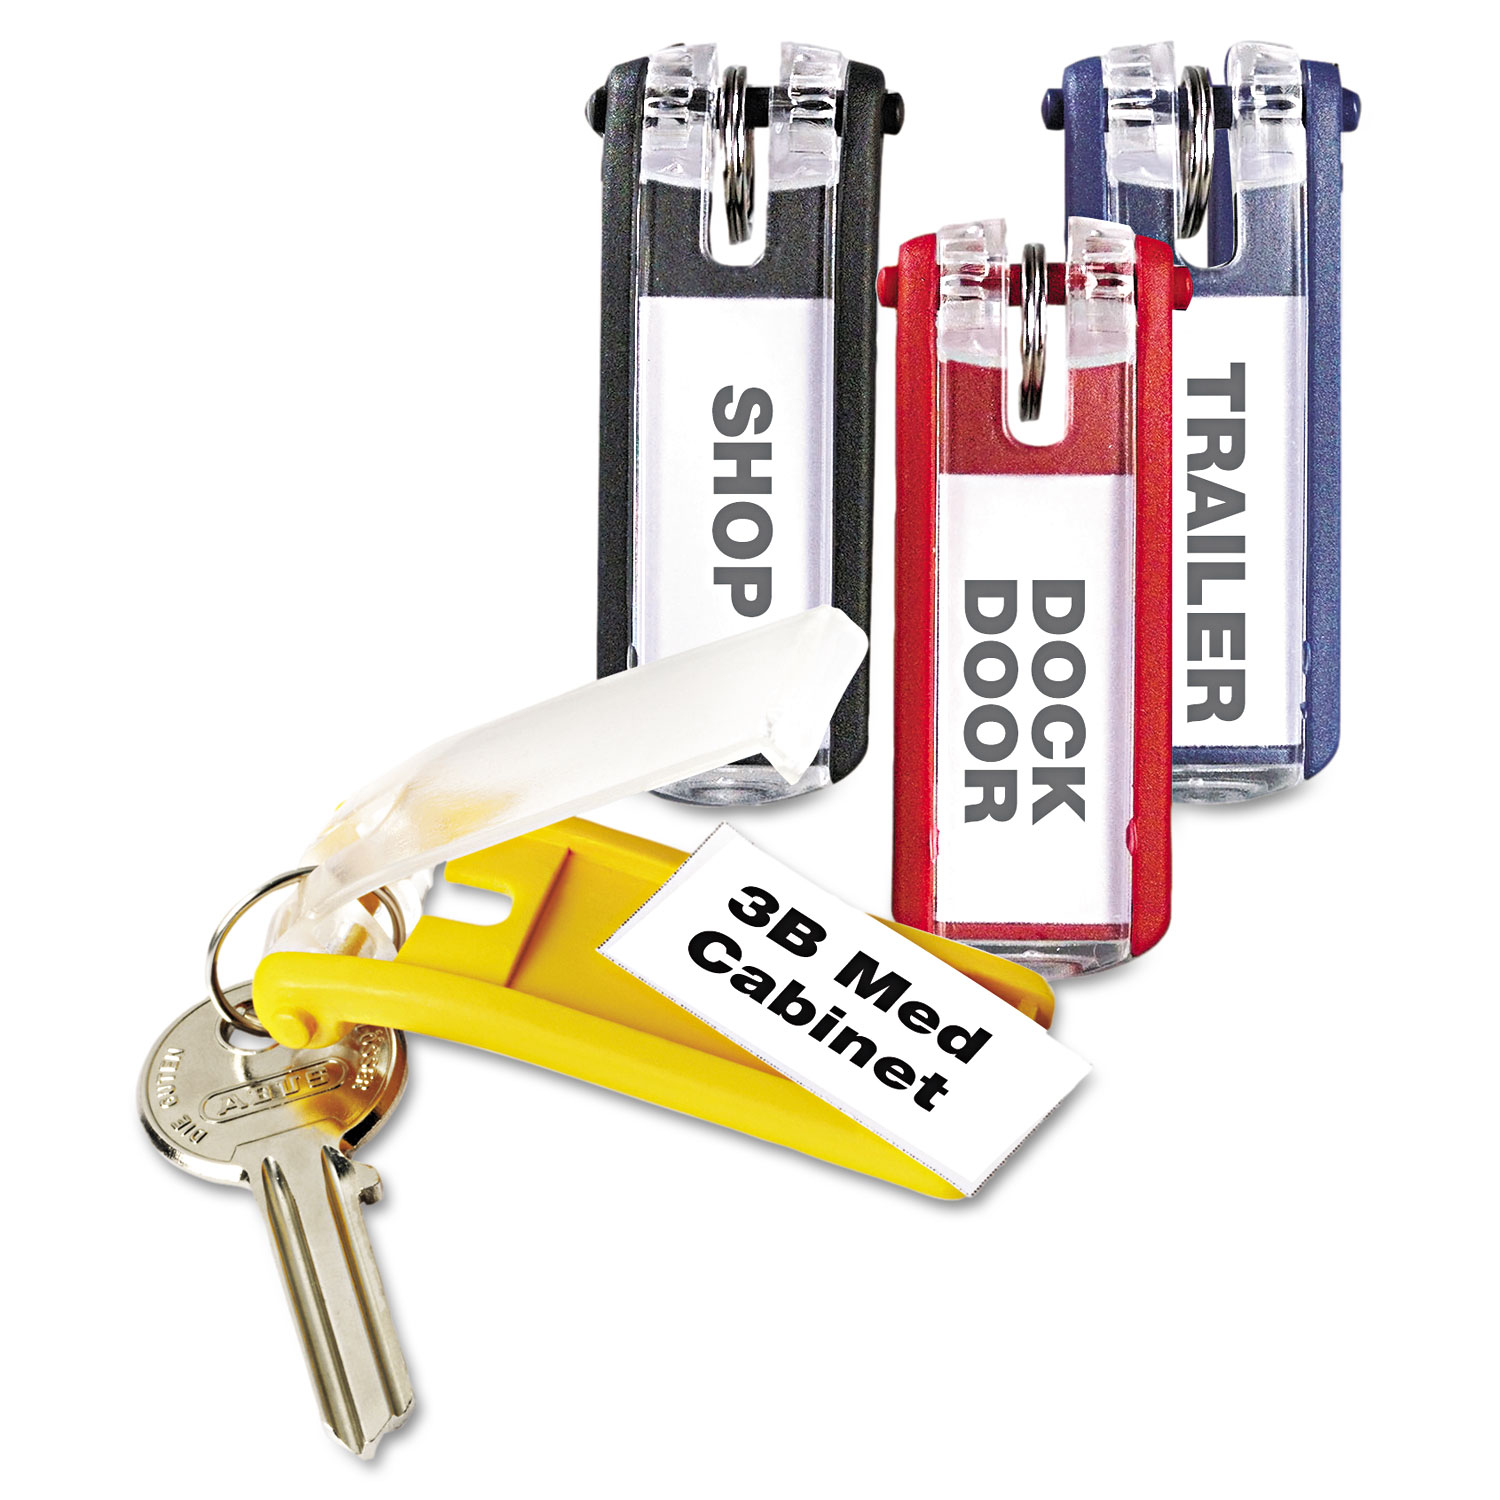  Durable 194900 Key Tags for Locking Key Cabinets, Plastic, 1 1/8 x 2 3/4, Assorted, 24/Pack (DBL194900) 